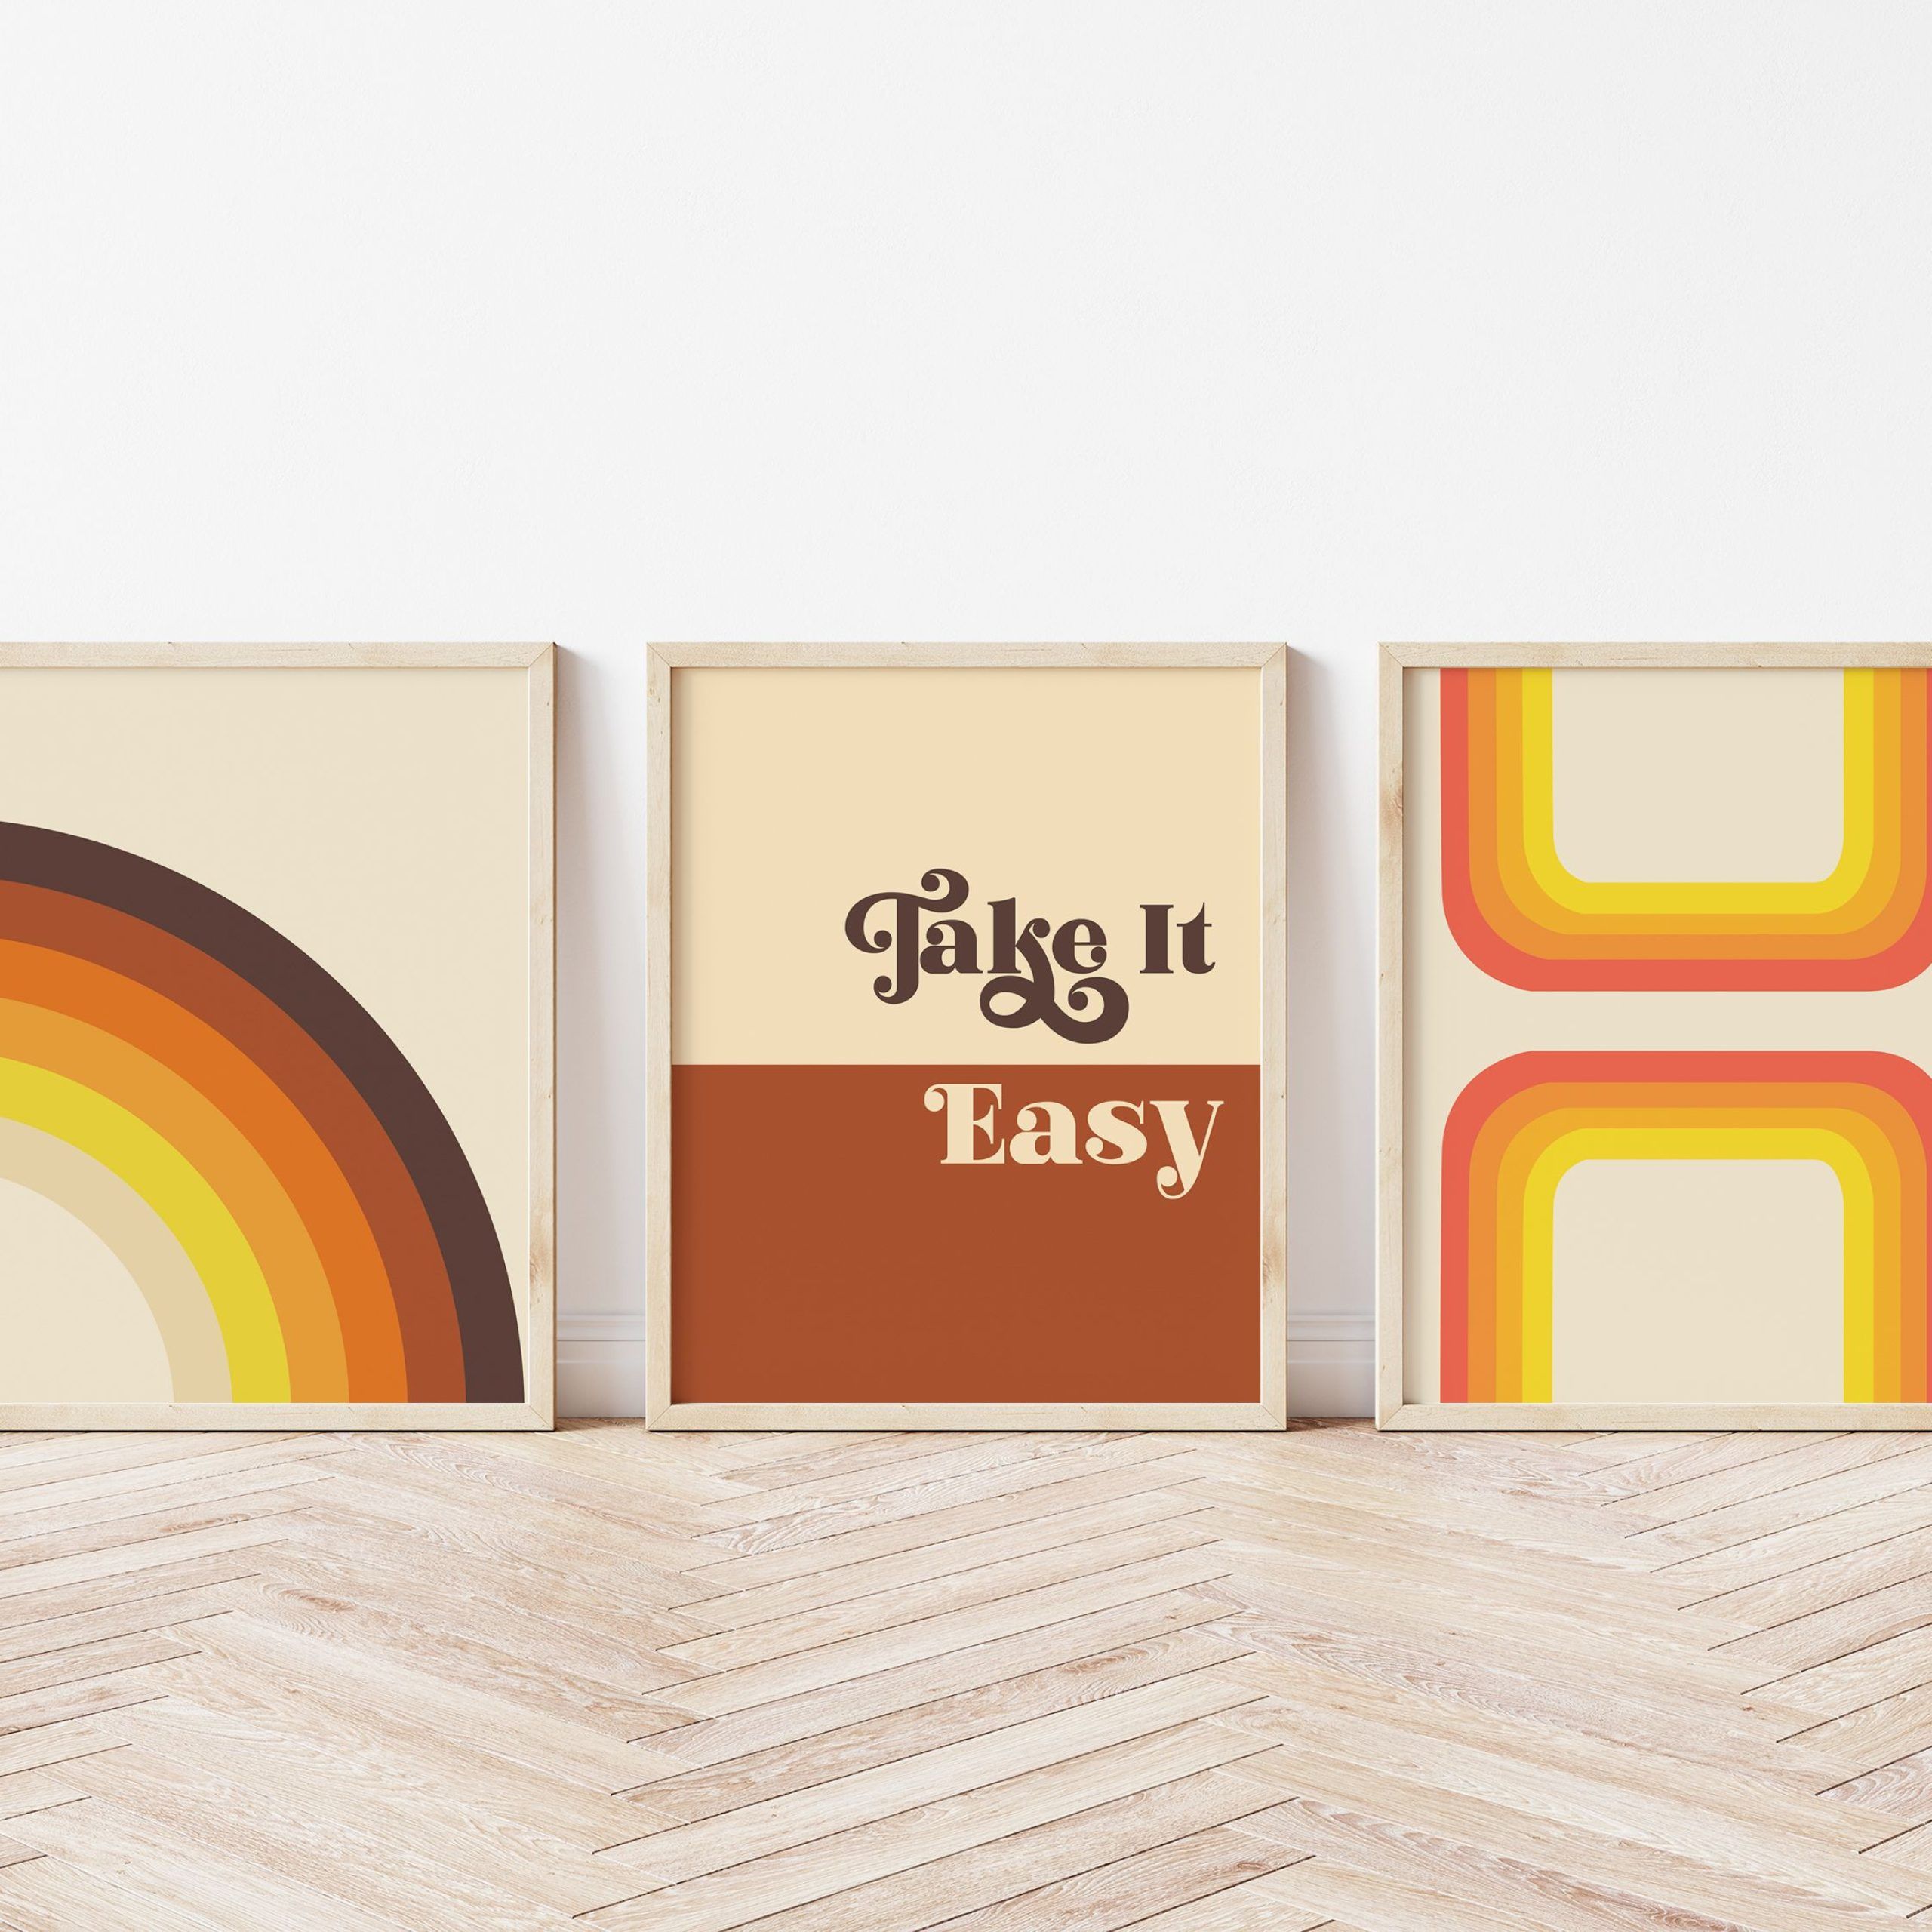 70S Set Of 3 Printsprintable Wall Artinstant – Etsy | Etsy Wall Art,  Printable Wall Art Quotes, Wall Art Quotes Intended For 70S Retro Wall Art (View 4 of 15)